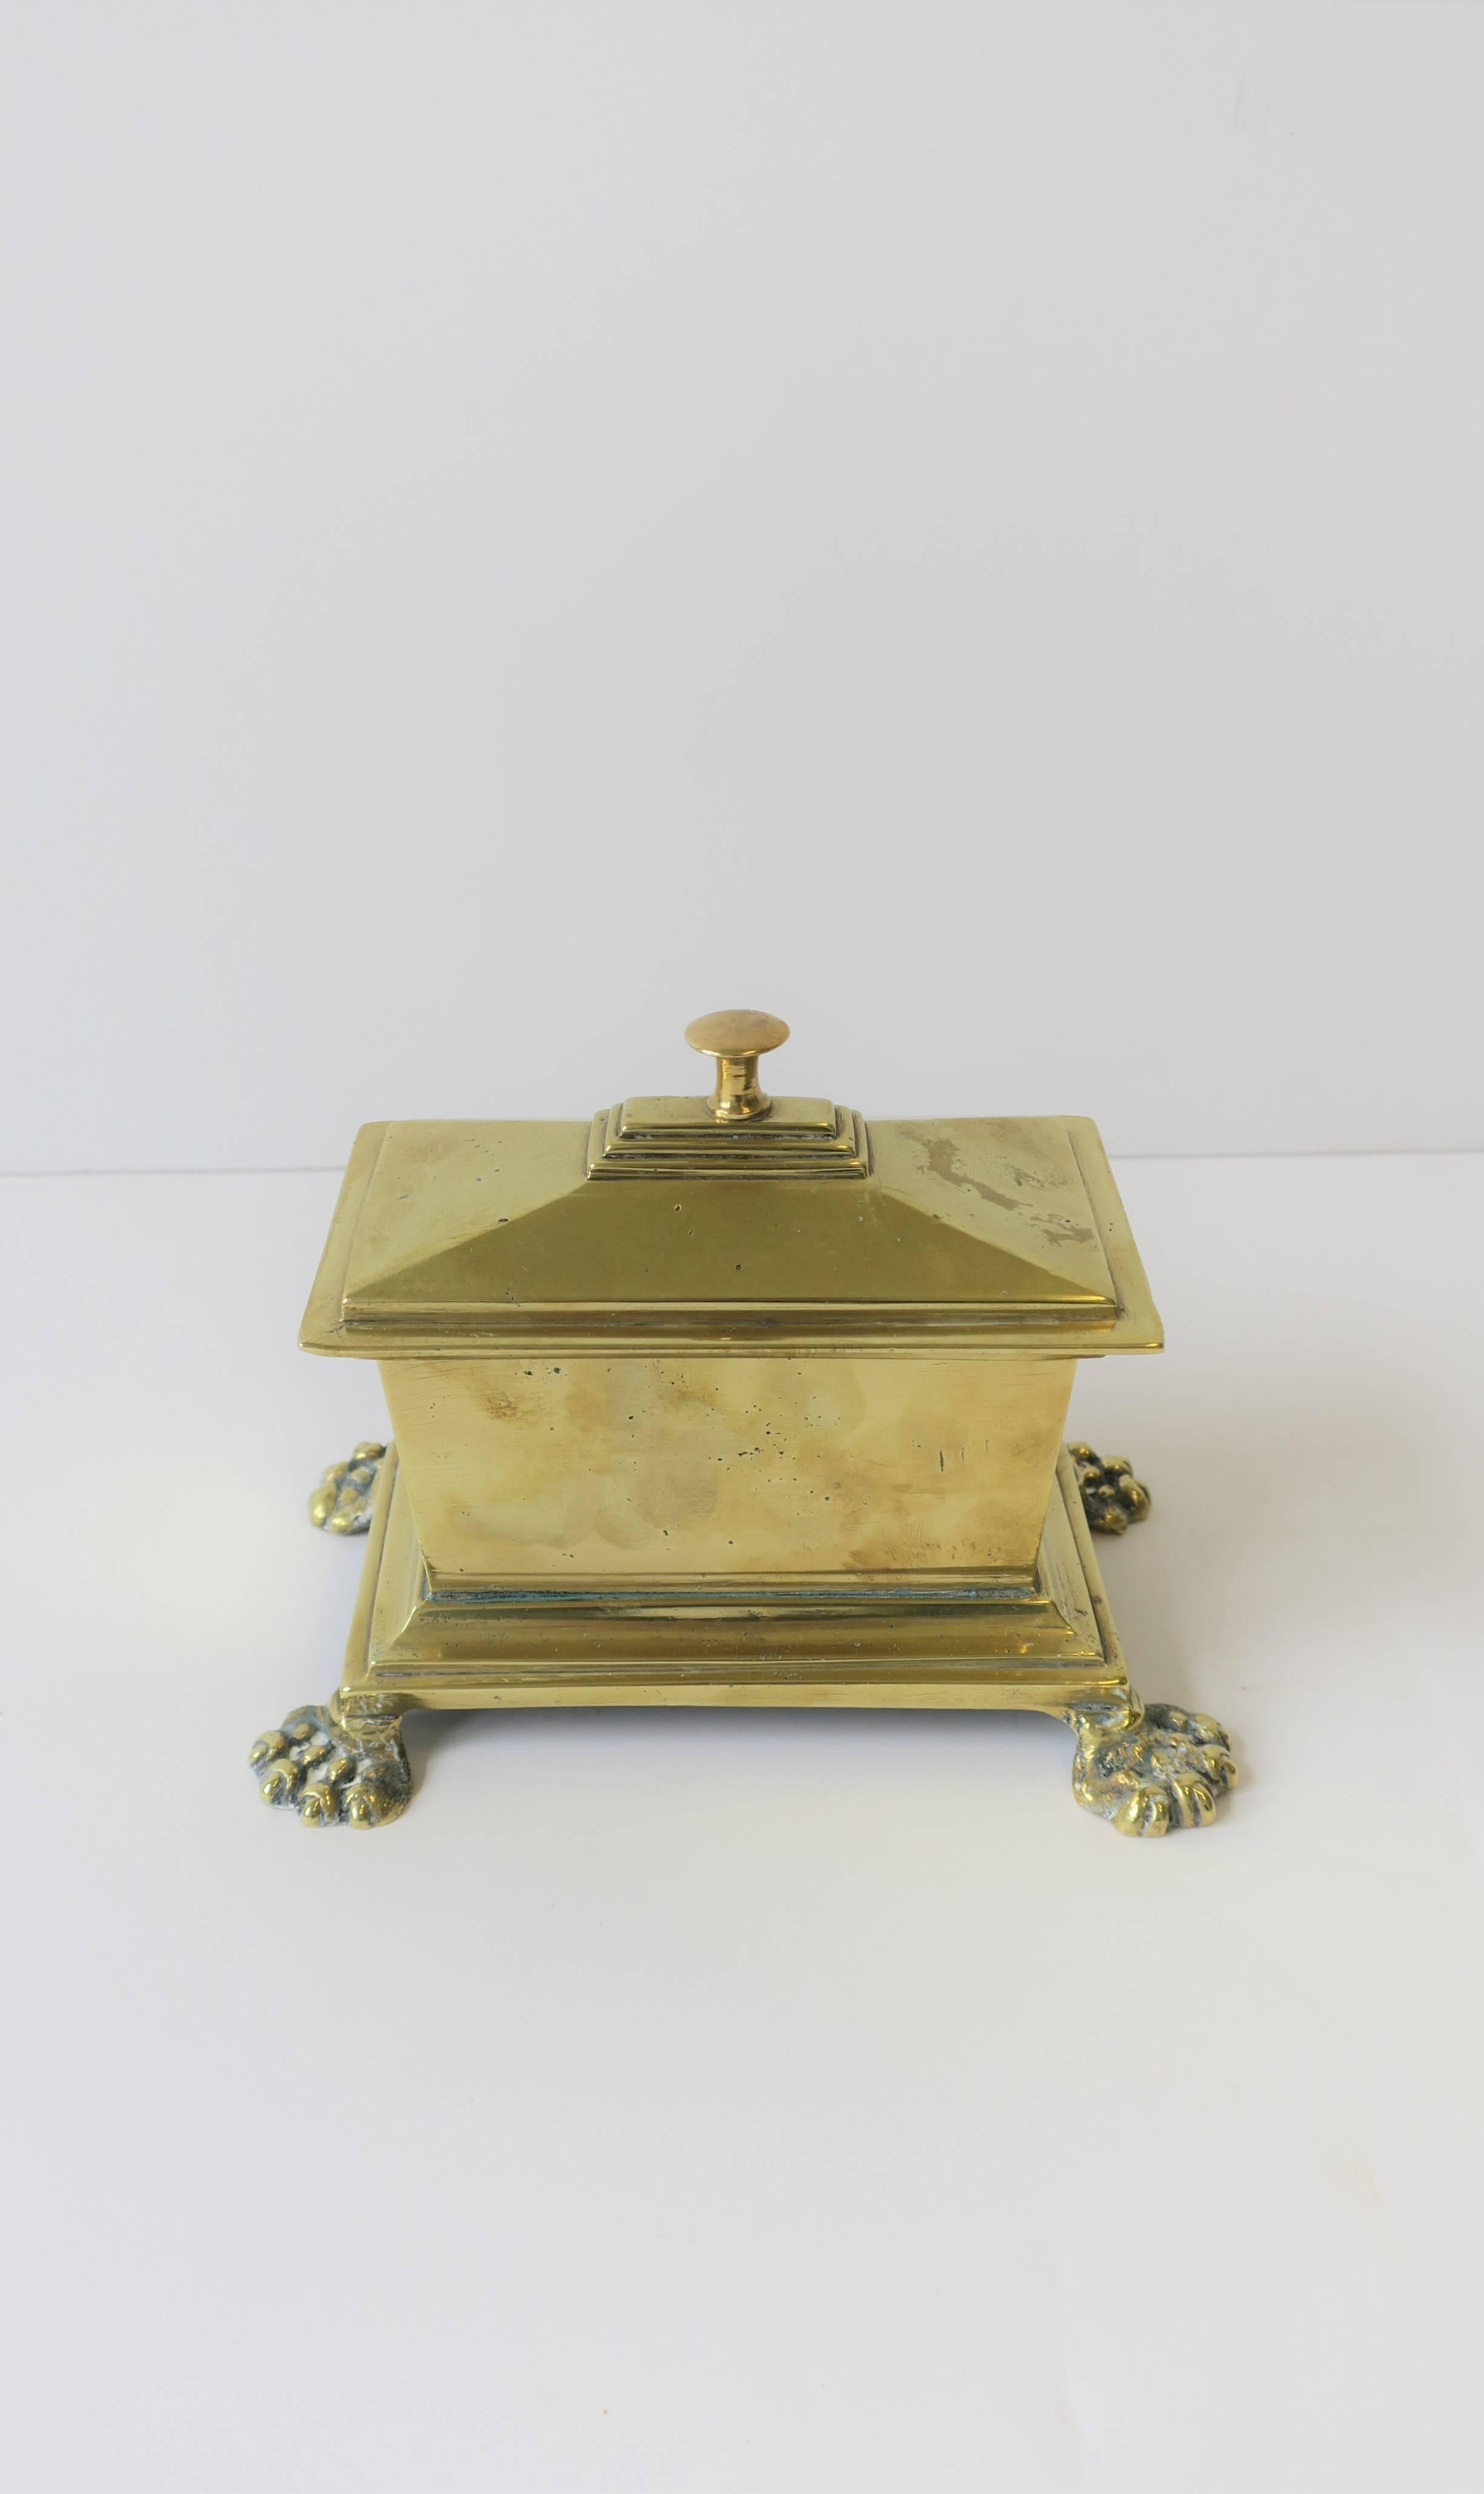 A beautiful and substantial brass box with lion paw feet in the Regency style, circa mid-20th century.

Box measures: 5.75 in W x 3.75 in. D x 4.75 in. H

 